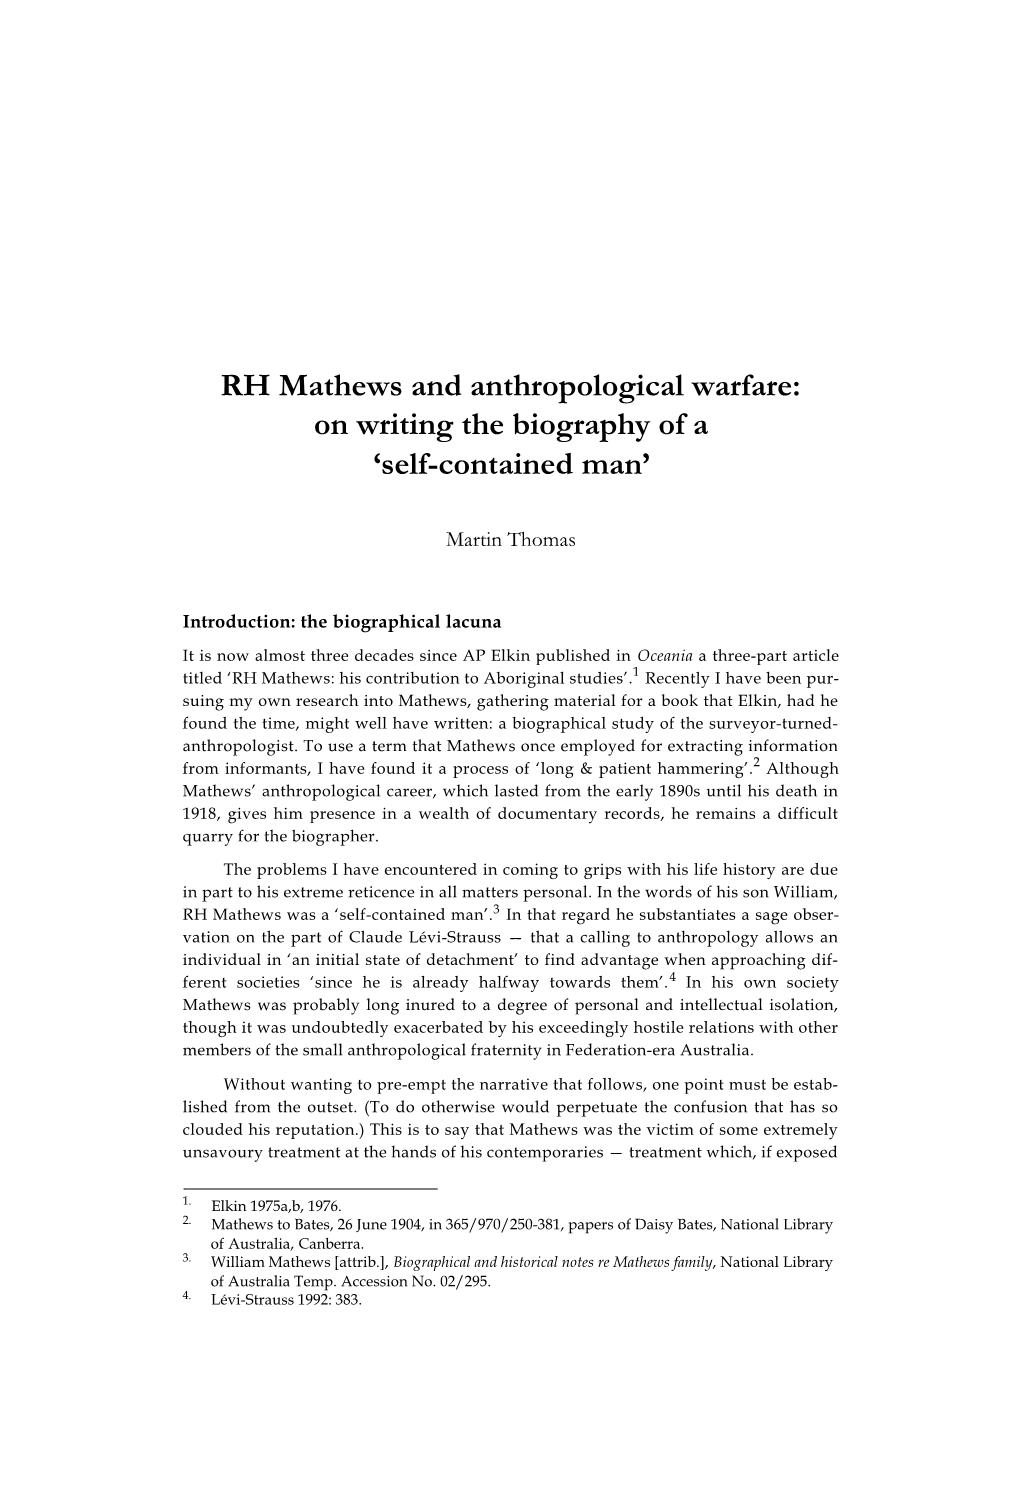 RH Mathews and Anthropological Warfare: on Writing the Biography of a ‘Self-Contained Man’